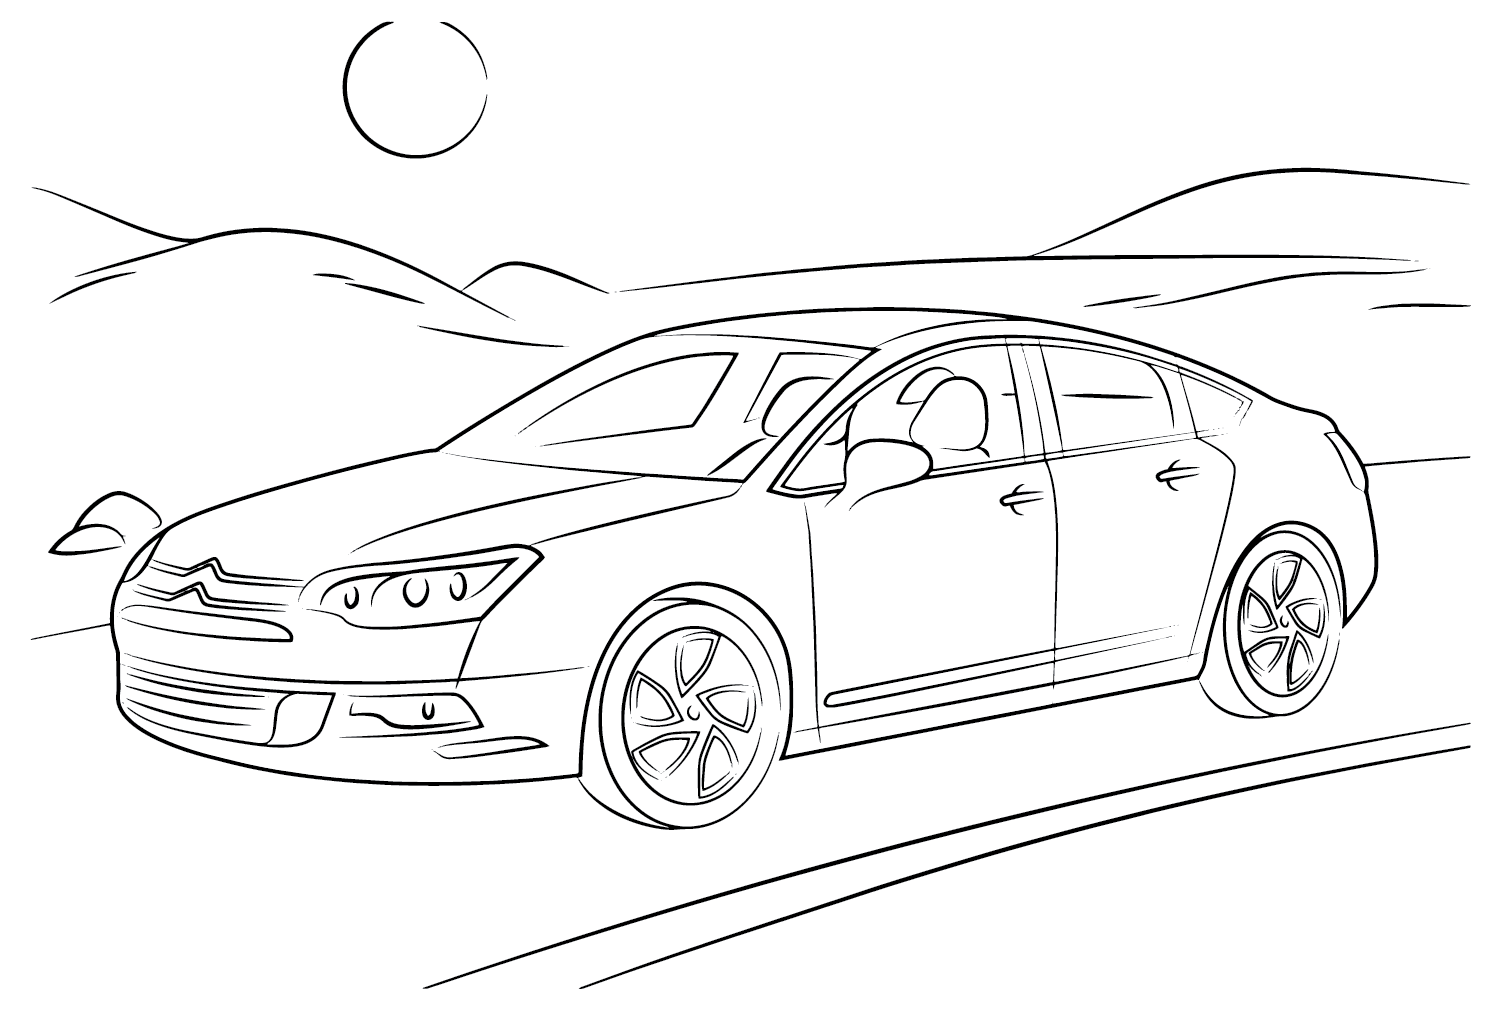 Citroën C5 Coloring Page from Citroën